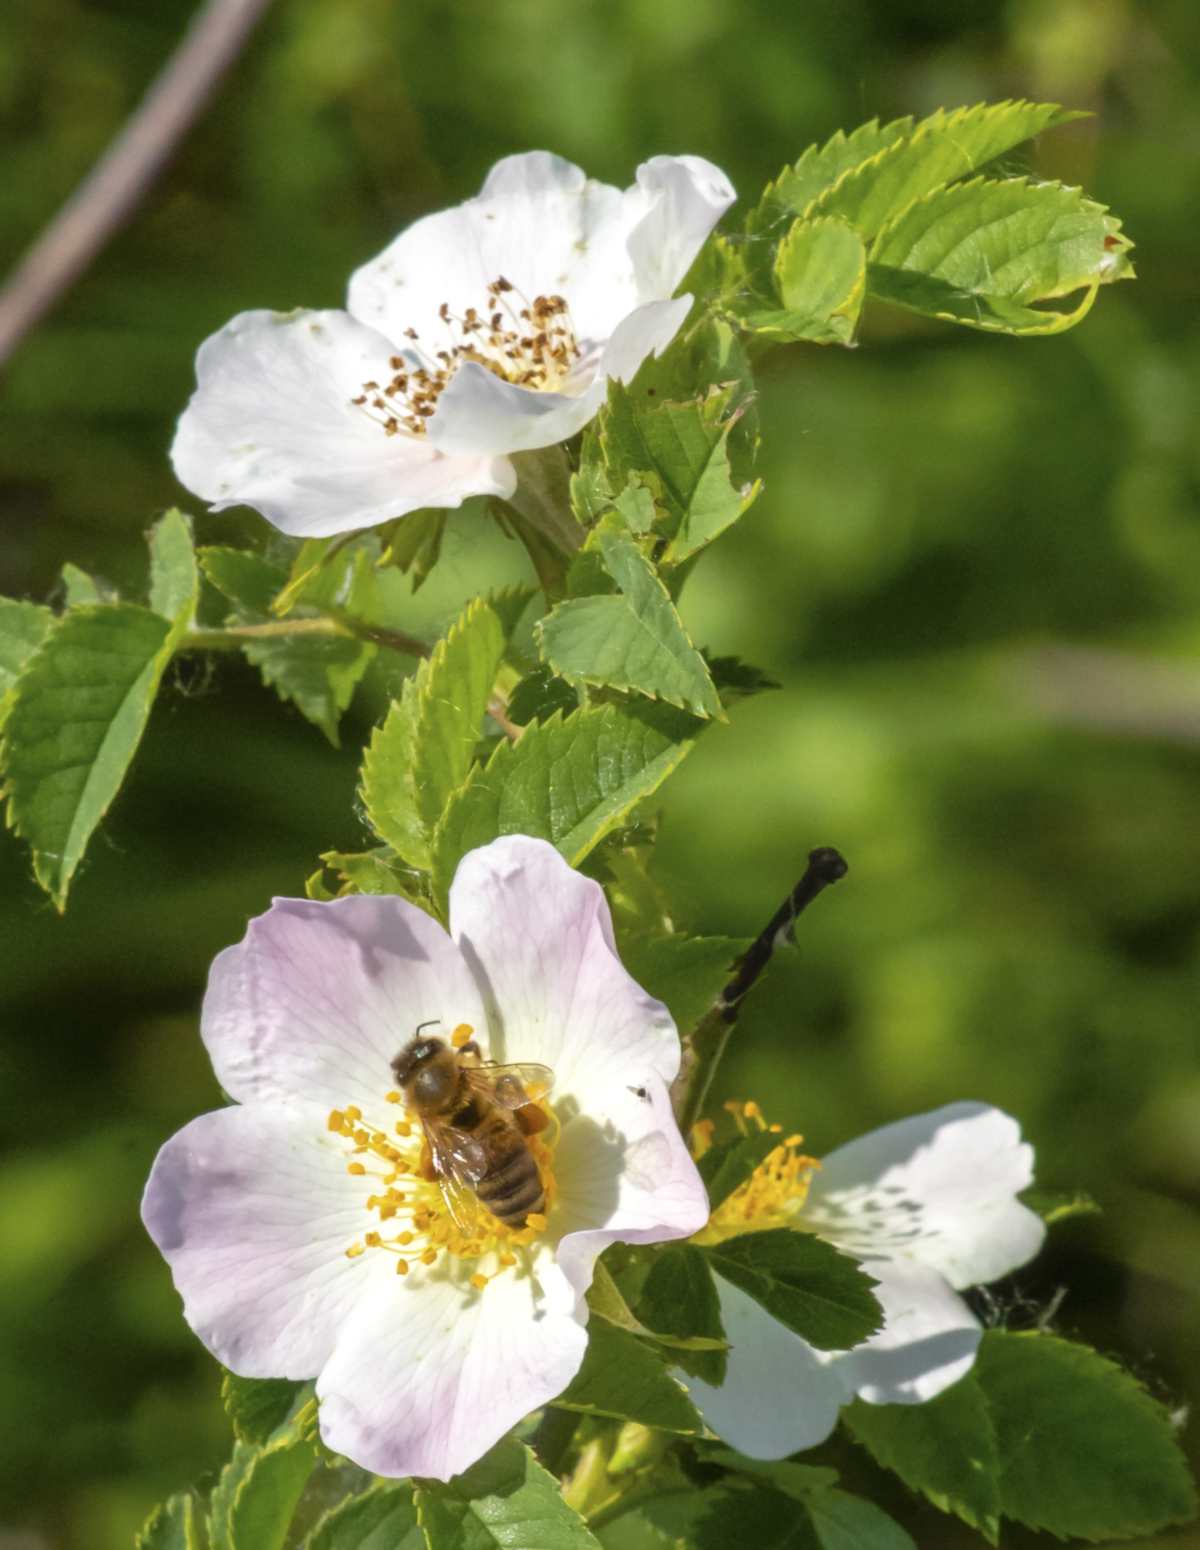 Dog rose blooms with bee foraging on them.